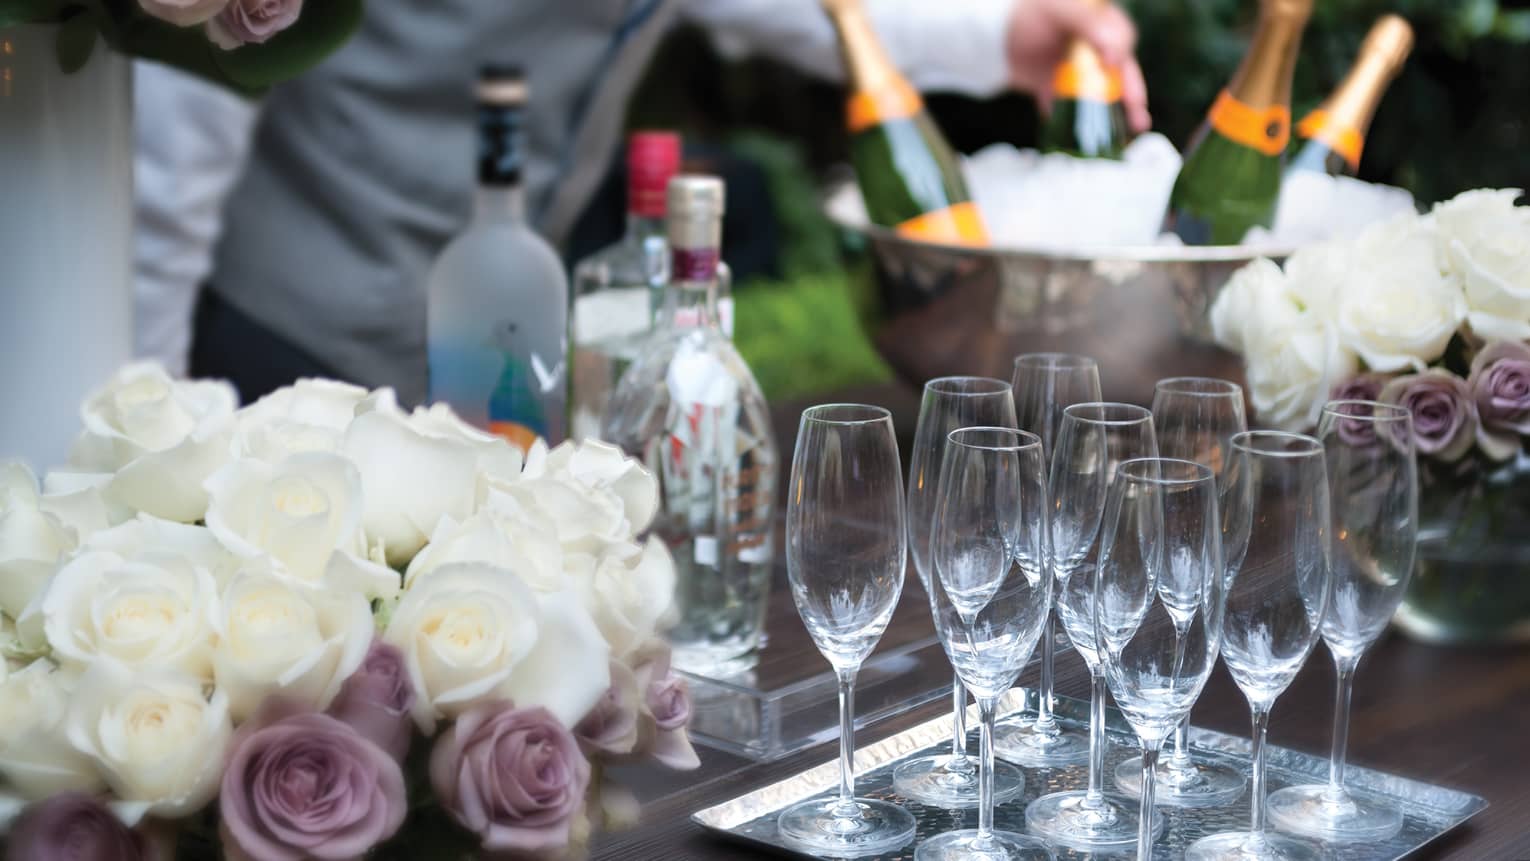 Close-up of white and purple roses, empty Champagne glasses on tray in front of ice bucket, bottles